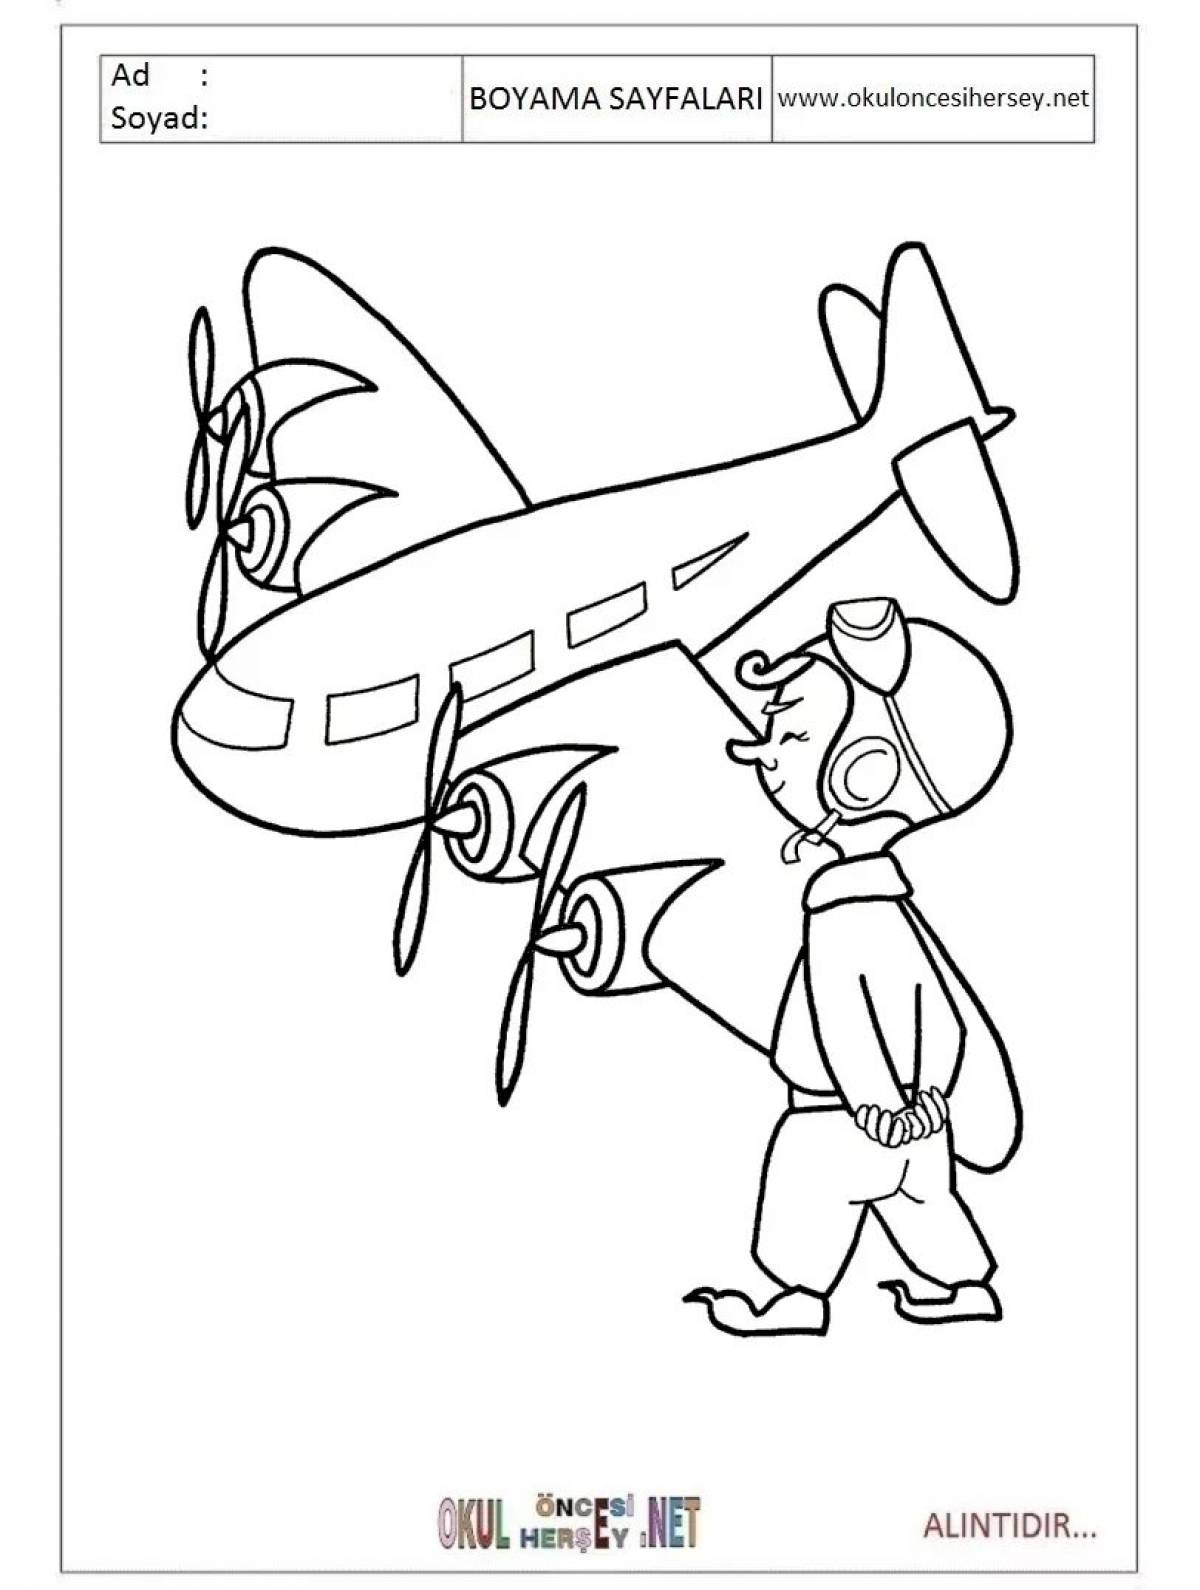 Incredible newbie military profession coloring book